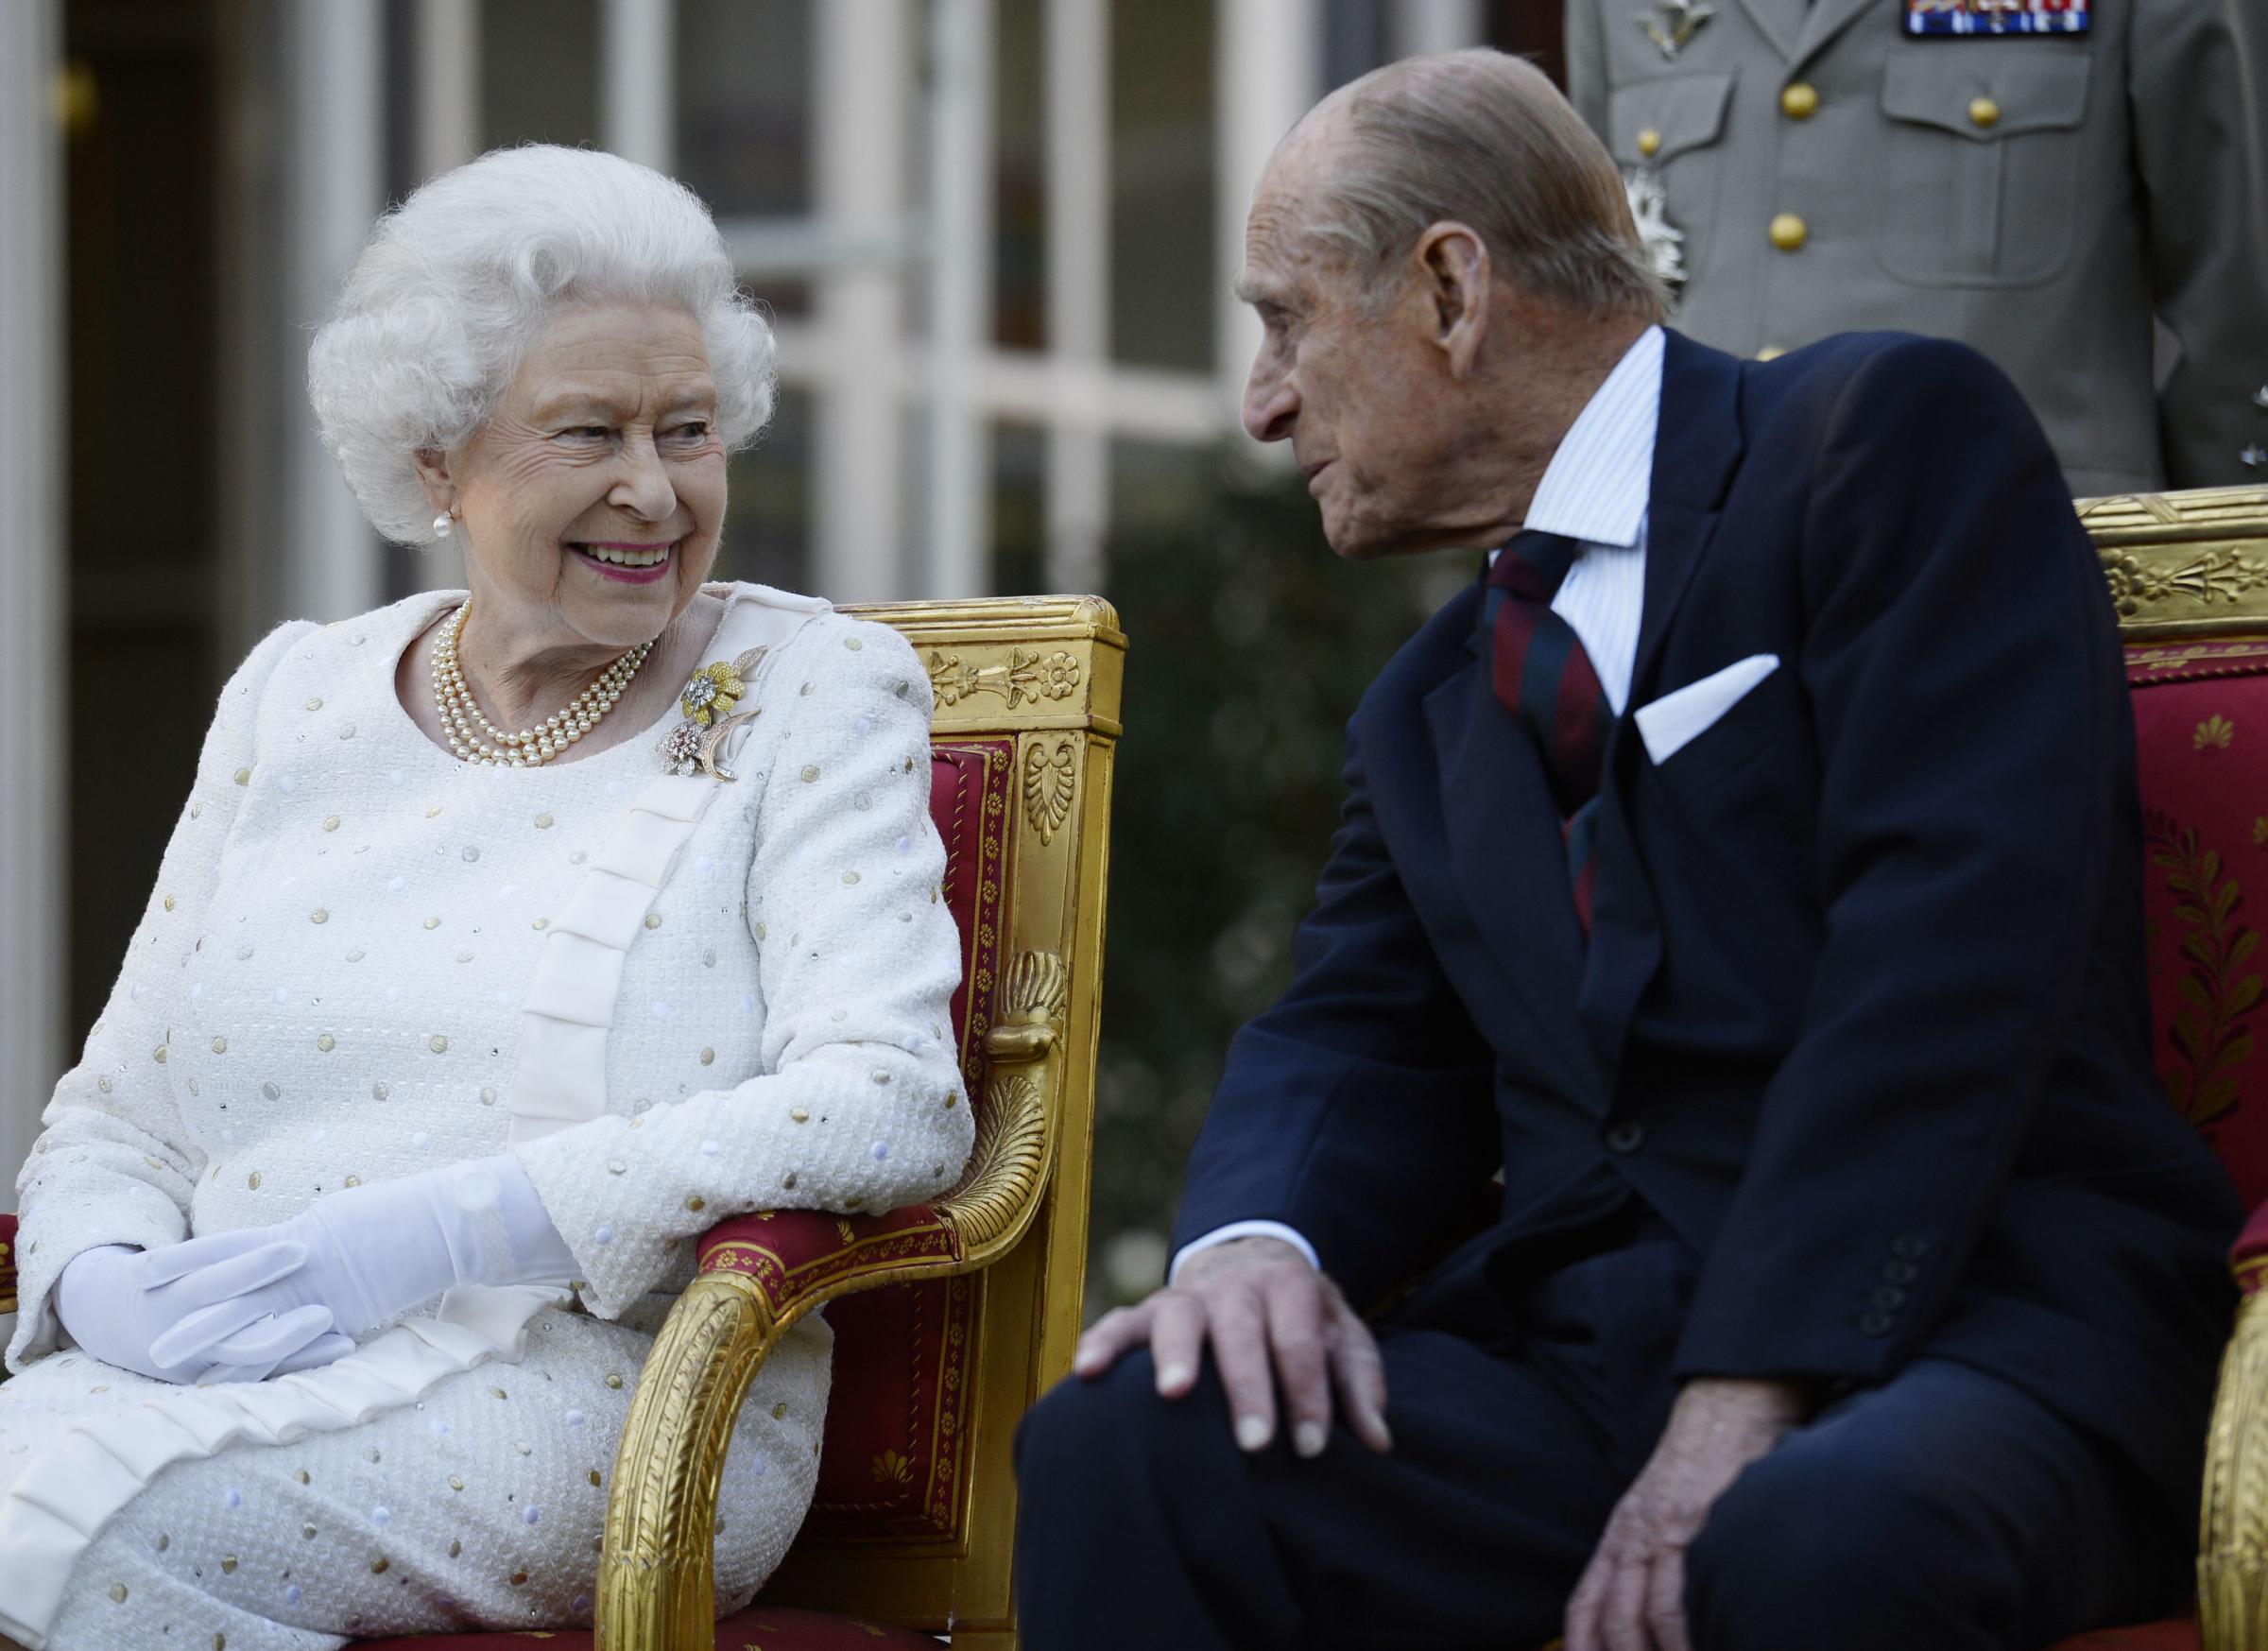 File photo dated 05/06/14 of Queen Elizabeth II and the Duke of Edinburgh attending a garden party in Paris, hosted by Sir Peter Ricketts, Britains Ambassador to France ahead of marking the 70th anniversary of the D-Day landings during World War II.